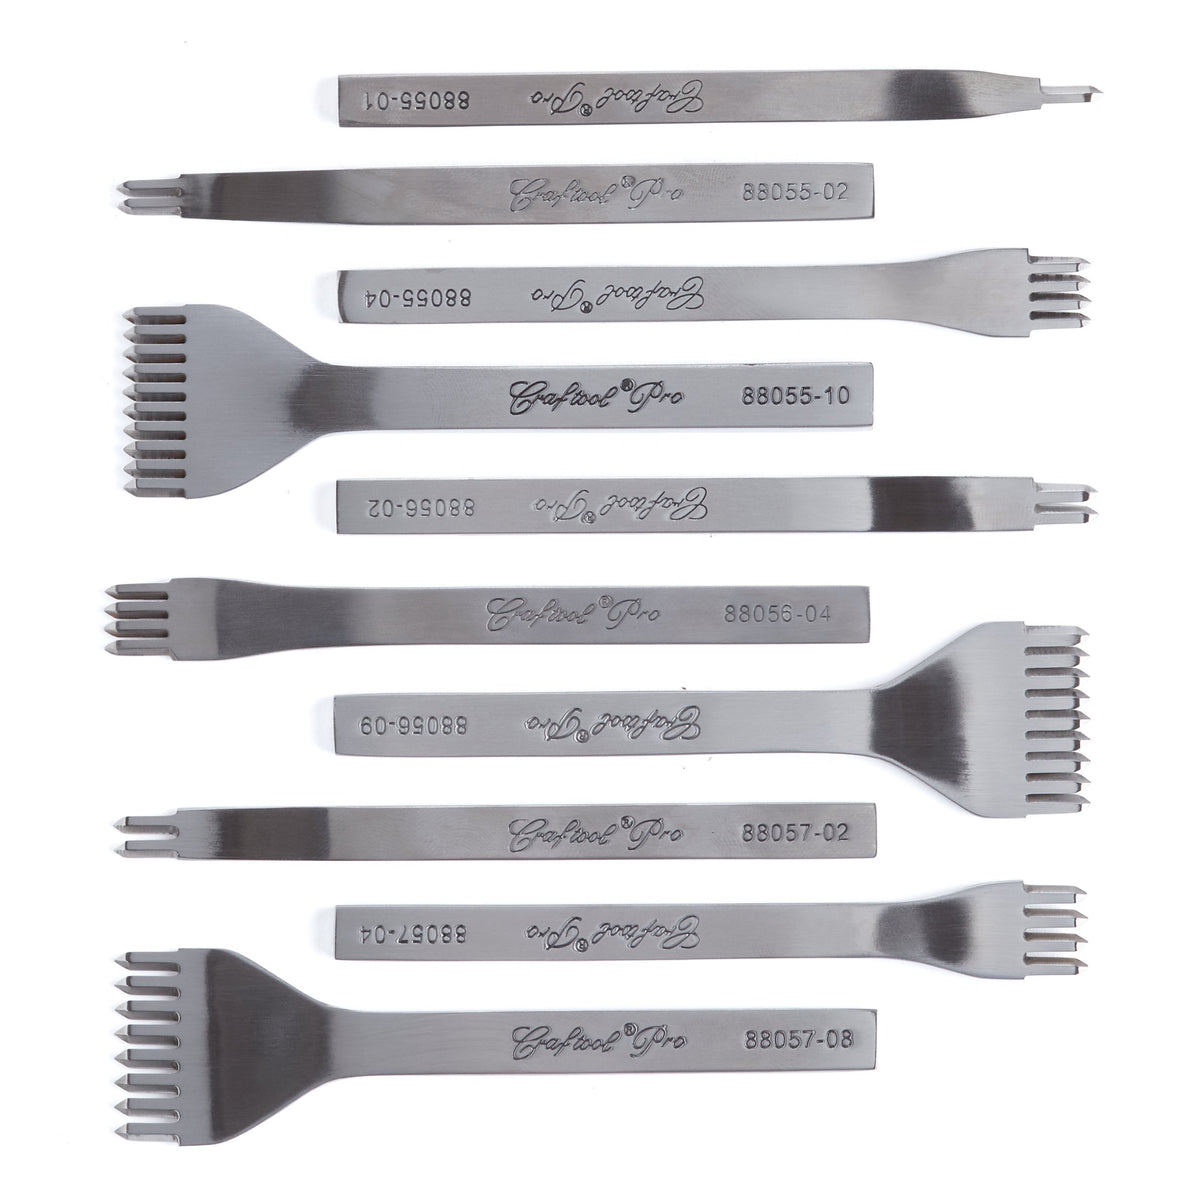 DIY Paper Crafting Tool Set Folding, Crimping, And Circle Core Cutting Bit  From Fsuh, $0.26